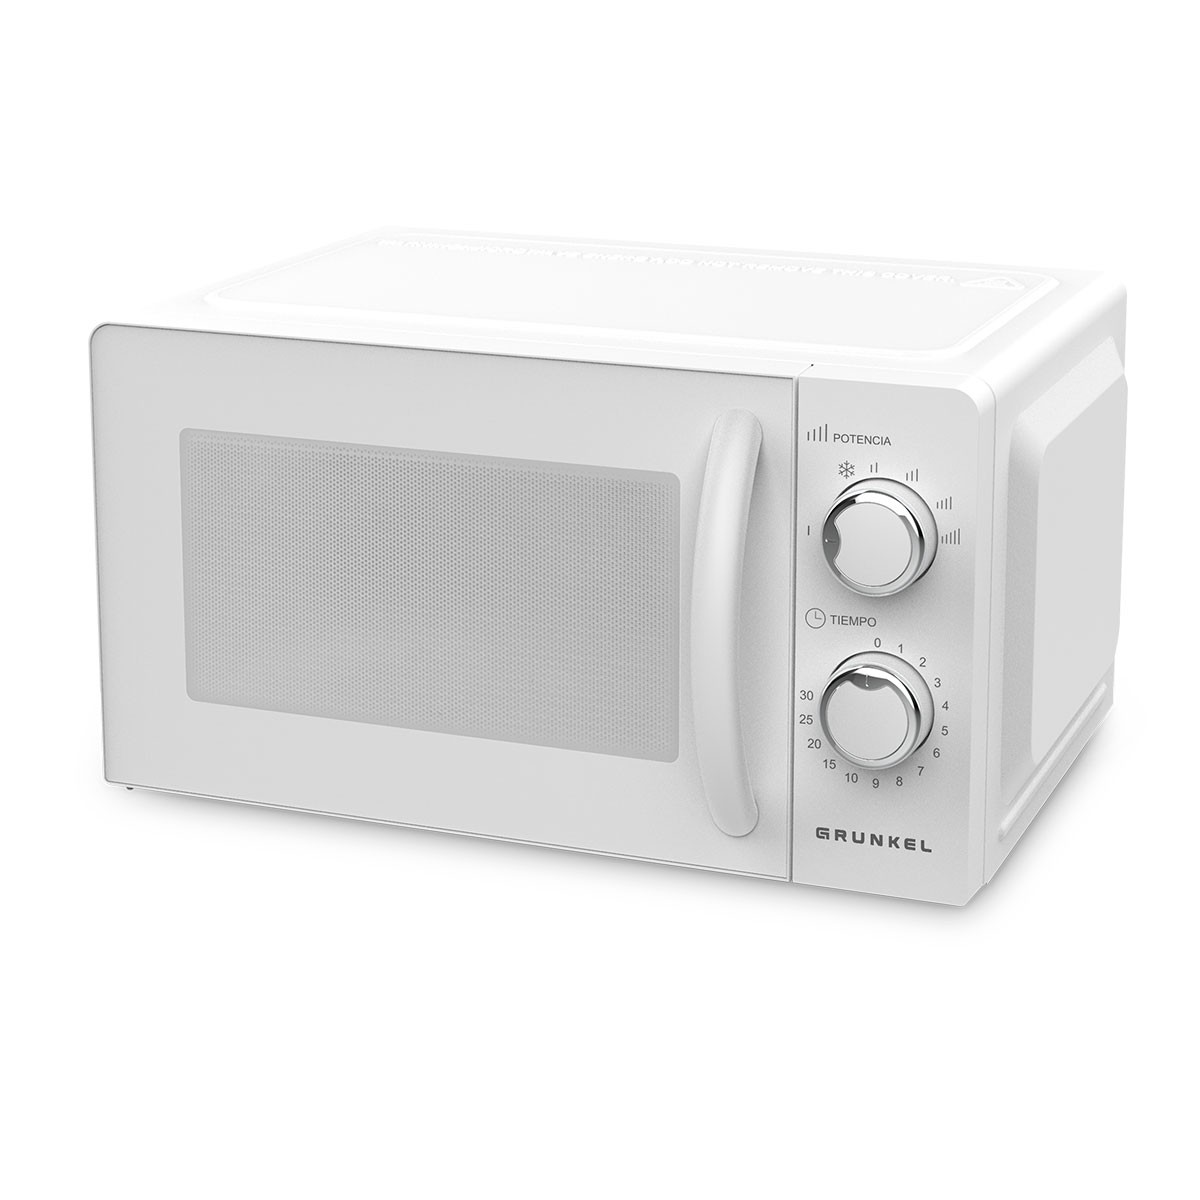 Horno Microondas CANDY MW20L acero inoxidable Gris (5775)